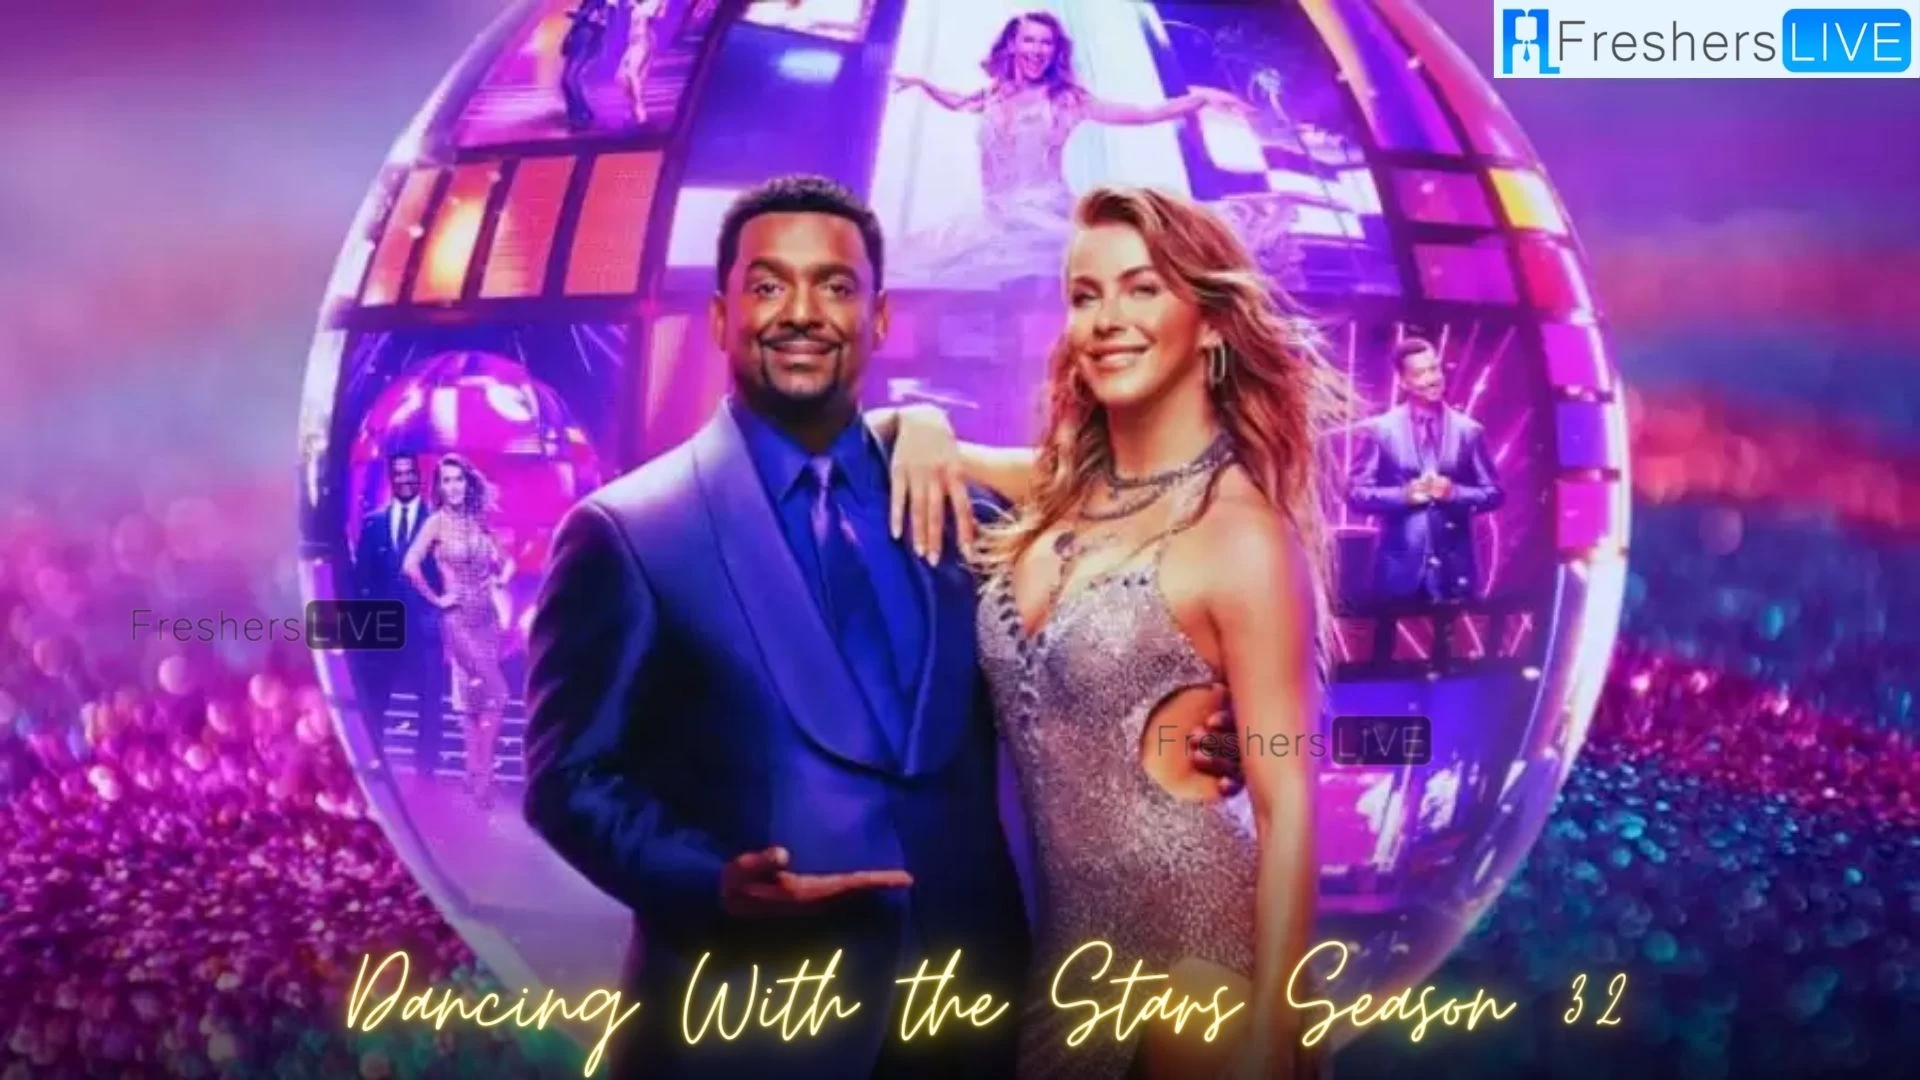 How to Watch Dancing With the Stars Season 32 Without Cable?